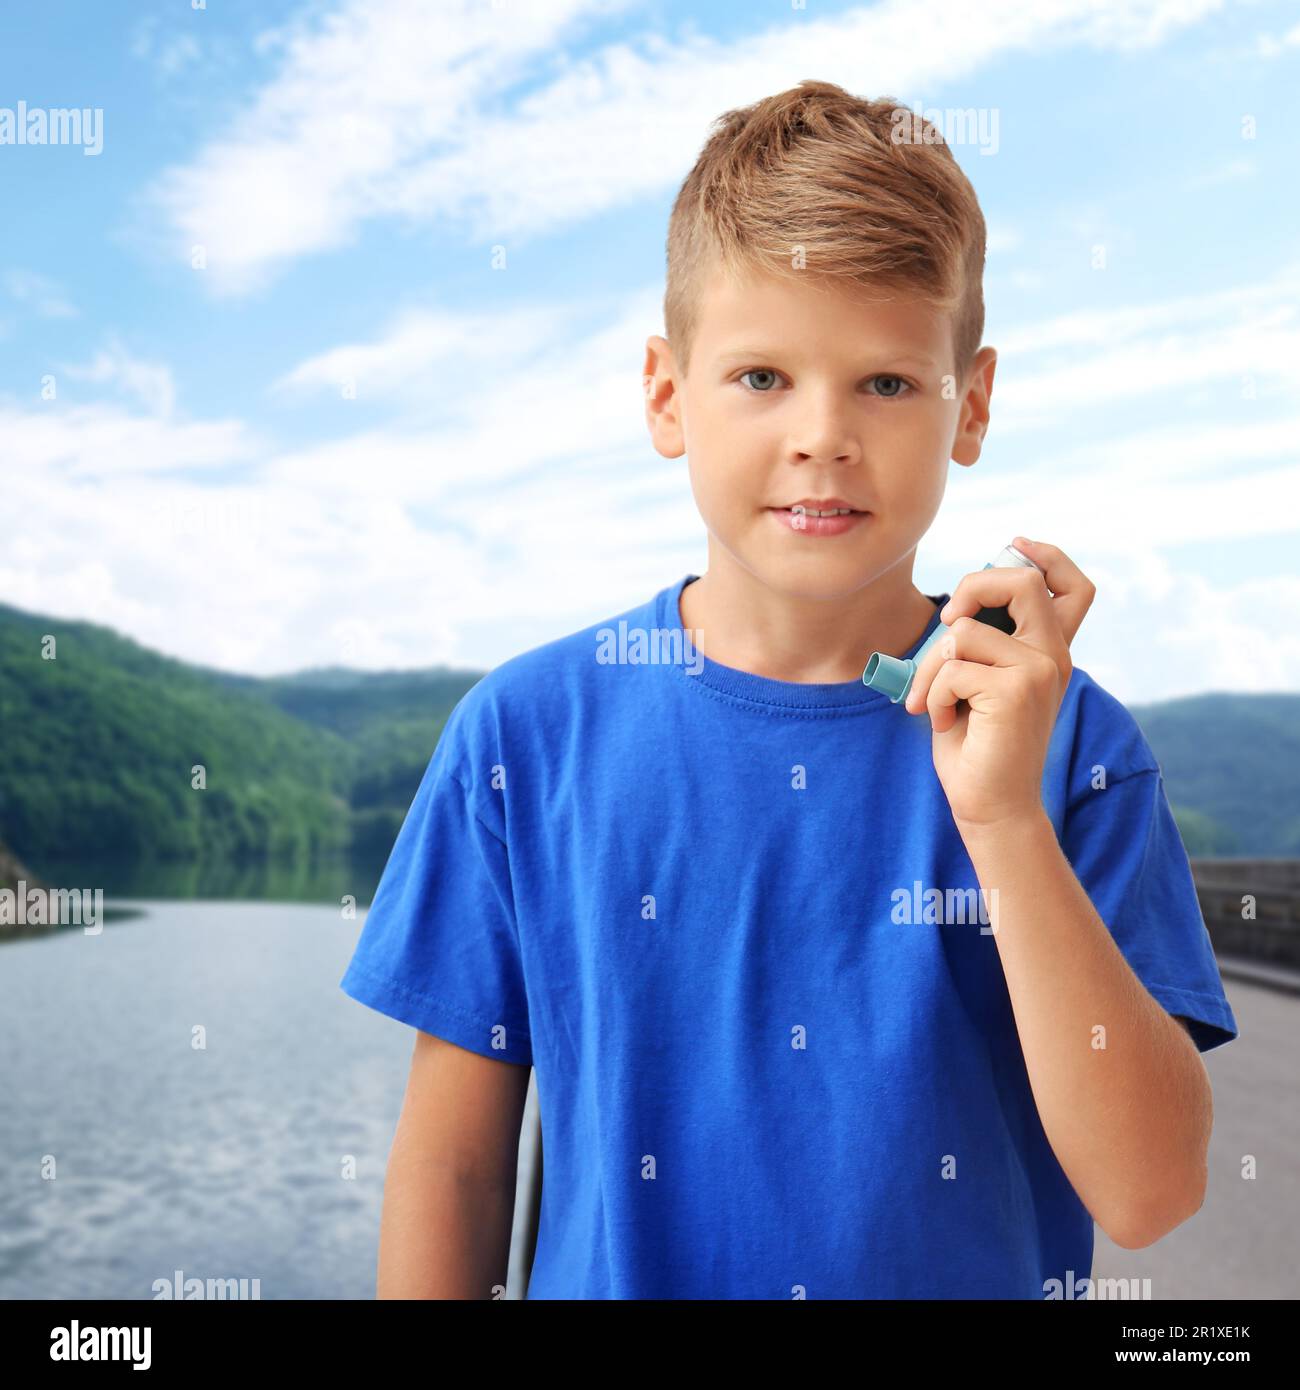 Little boy with asthma inhaler near lake. Emergency first aid during outdoor recreation Stock Photo